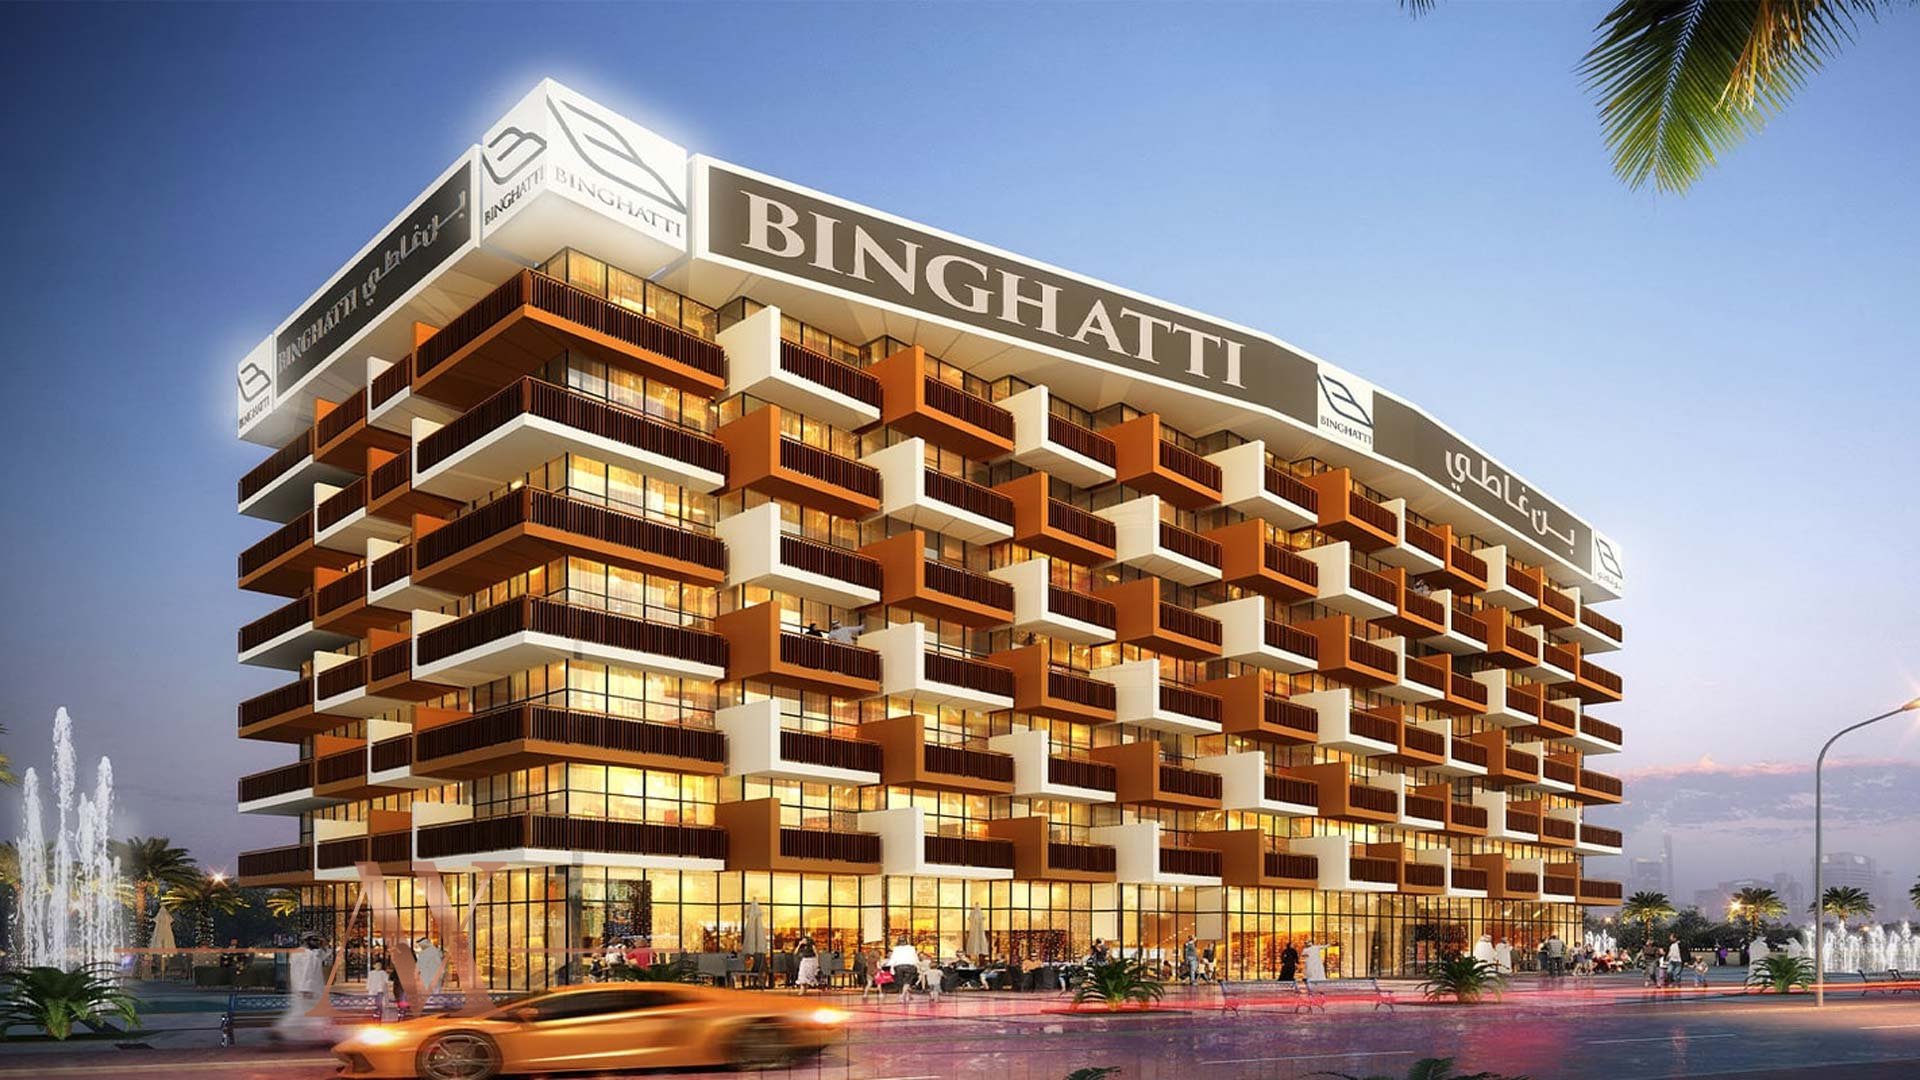 BINGHATTI EAST AND WEST APARTMENTS property for sale with Bitcoin & Cryptocurrency - photo 1